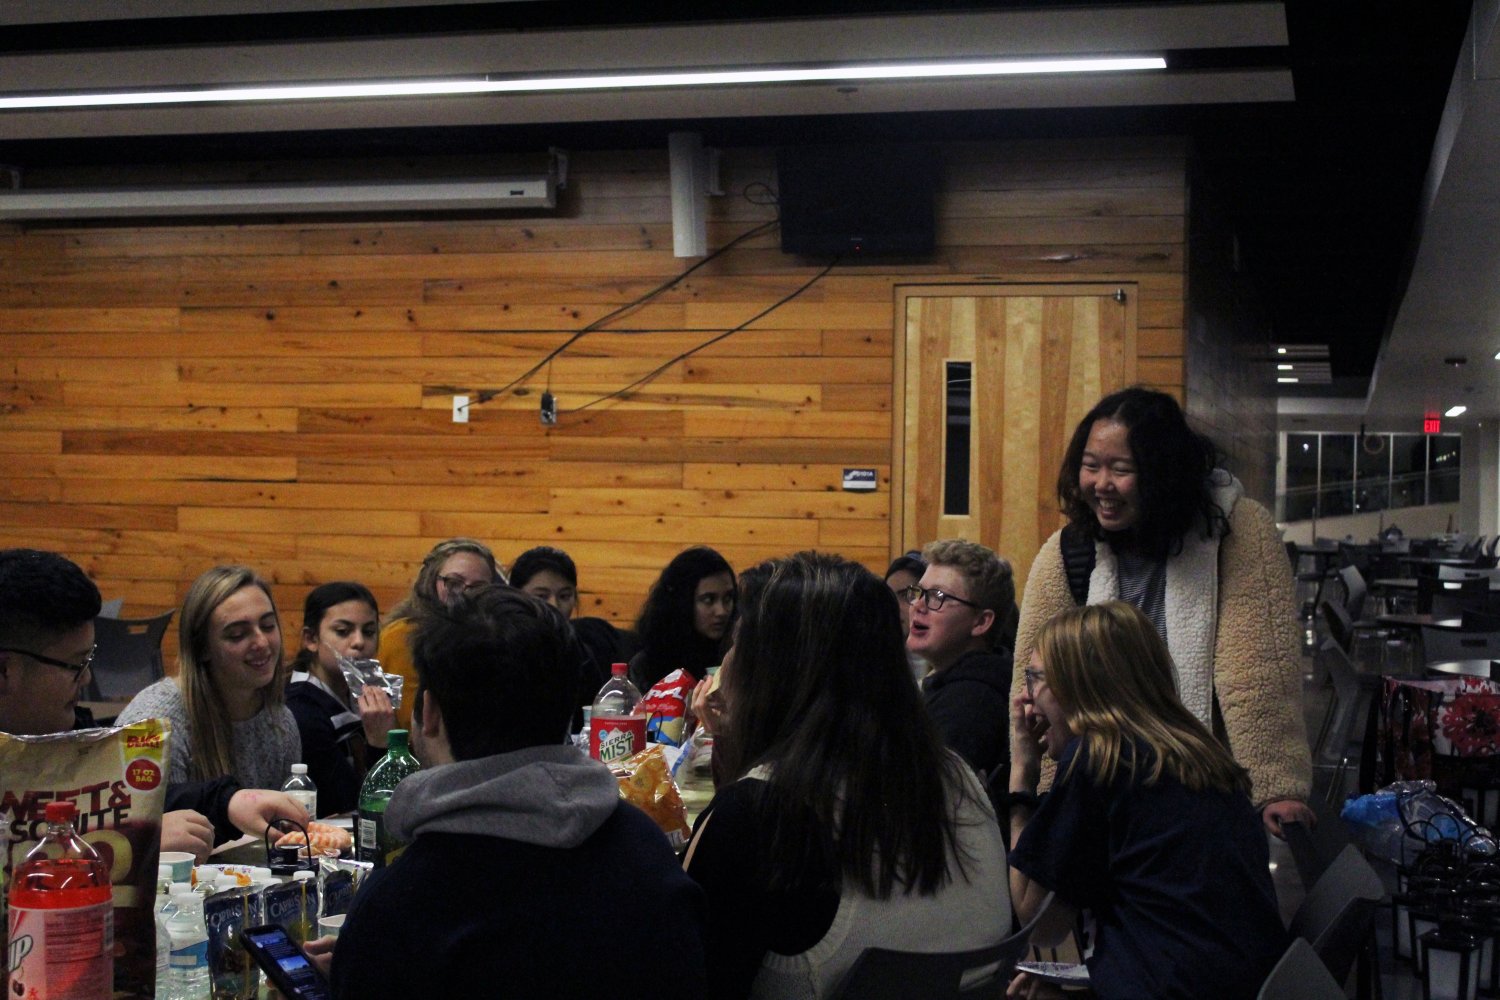 Members of many different clubs joke and laugh together as they enjoy their food at the StuCo club feast. 
Photo by Kyla Barnett